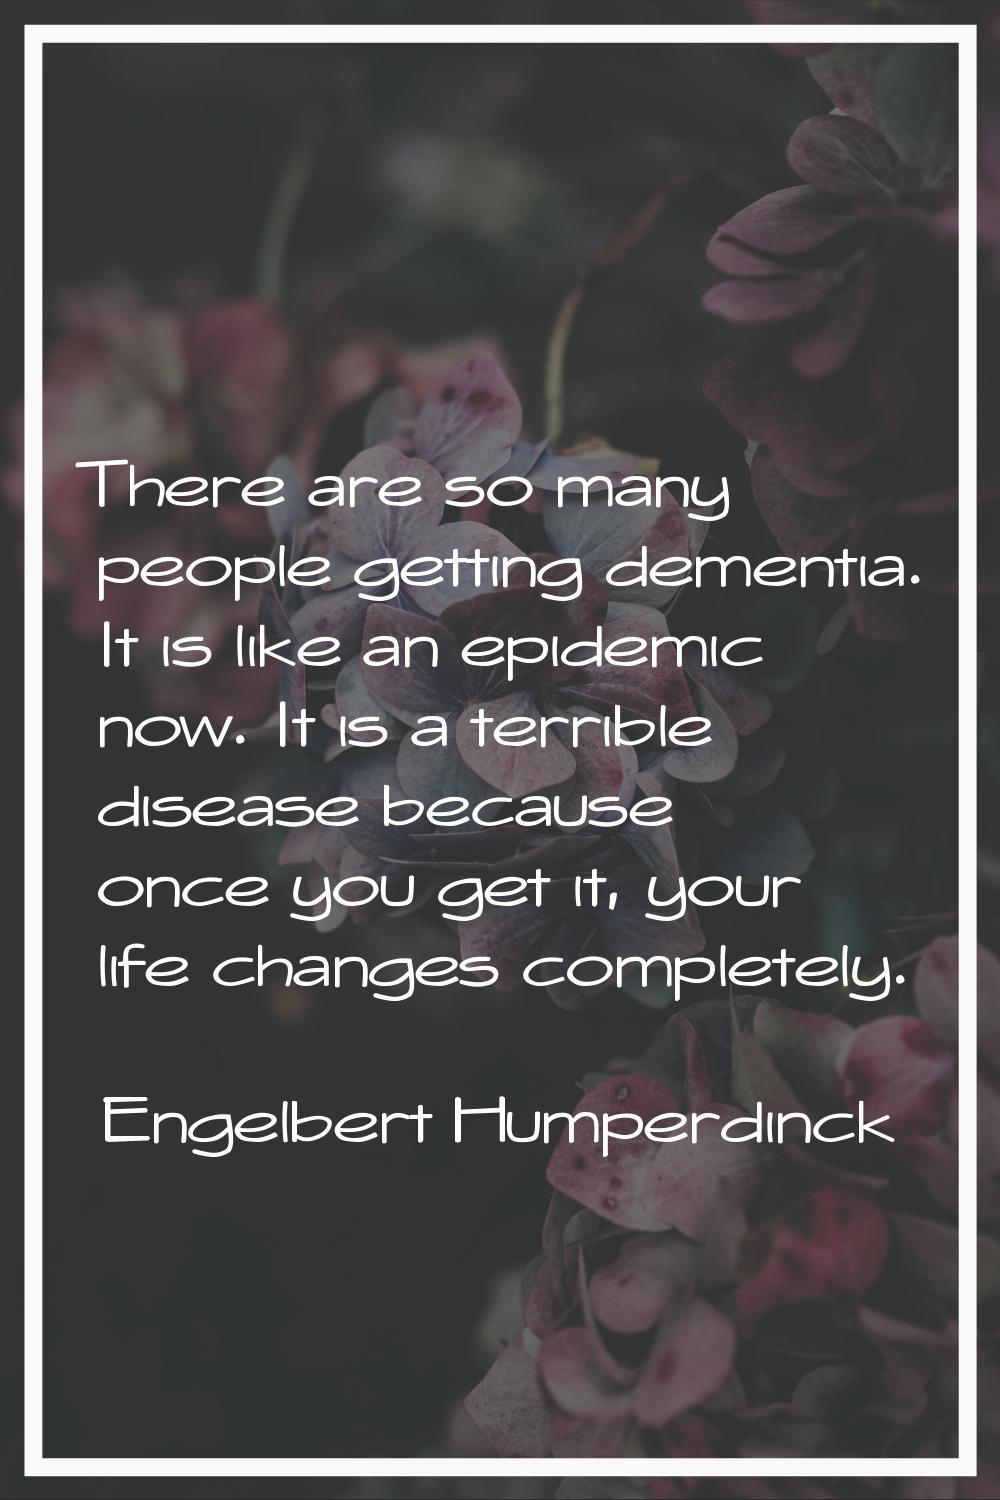 There are so many people getting dementia. It is like an epidemic now. It is a terrible disease bec